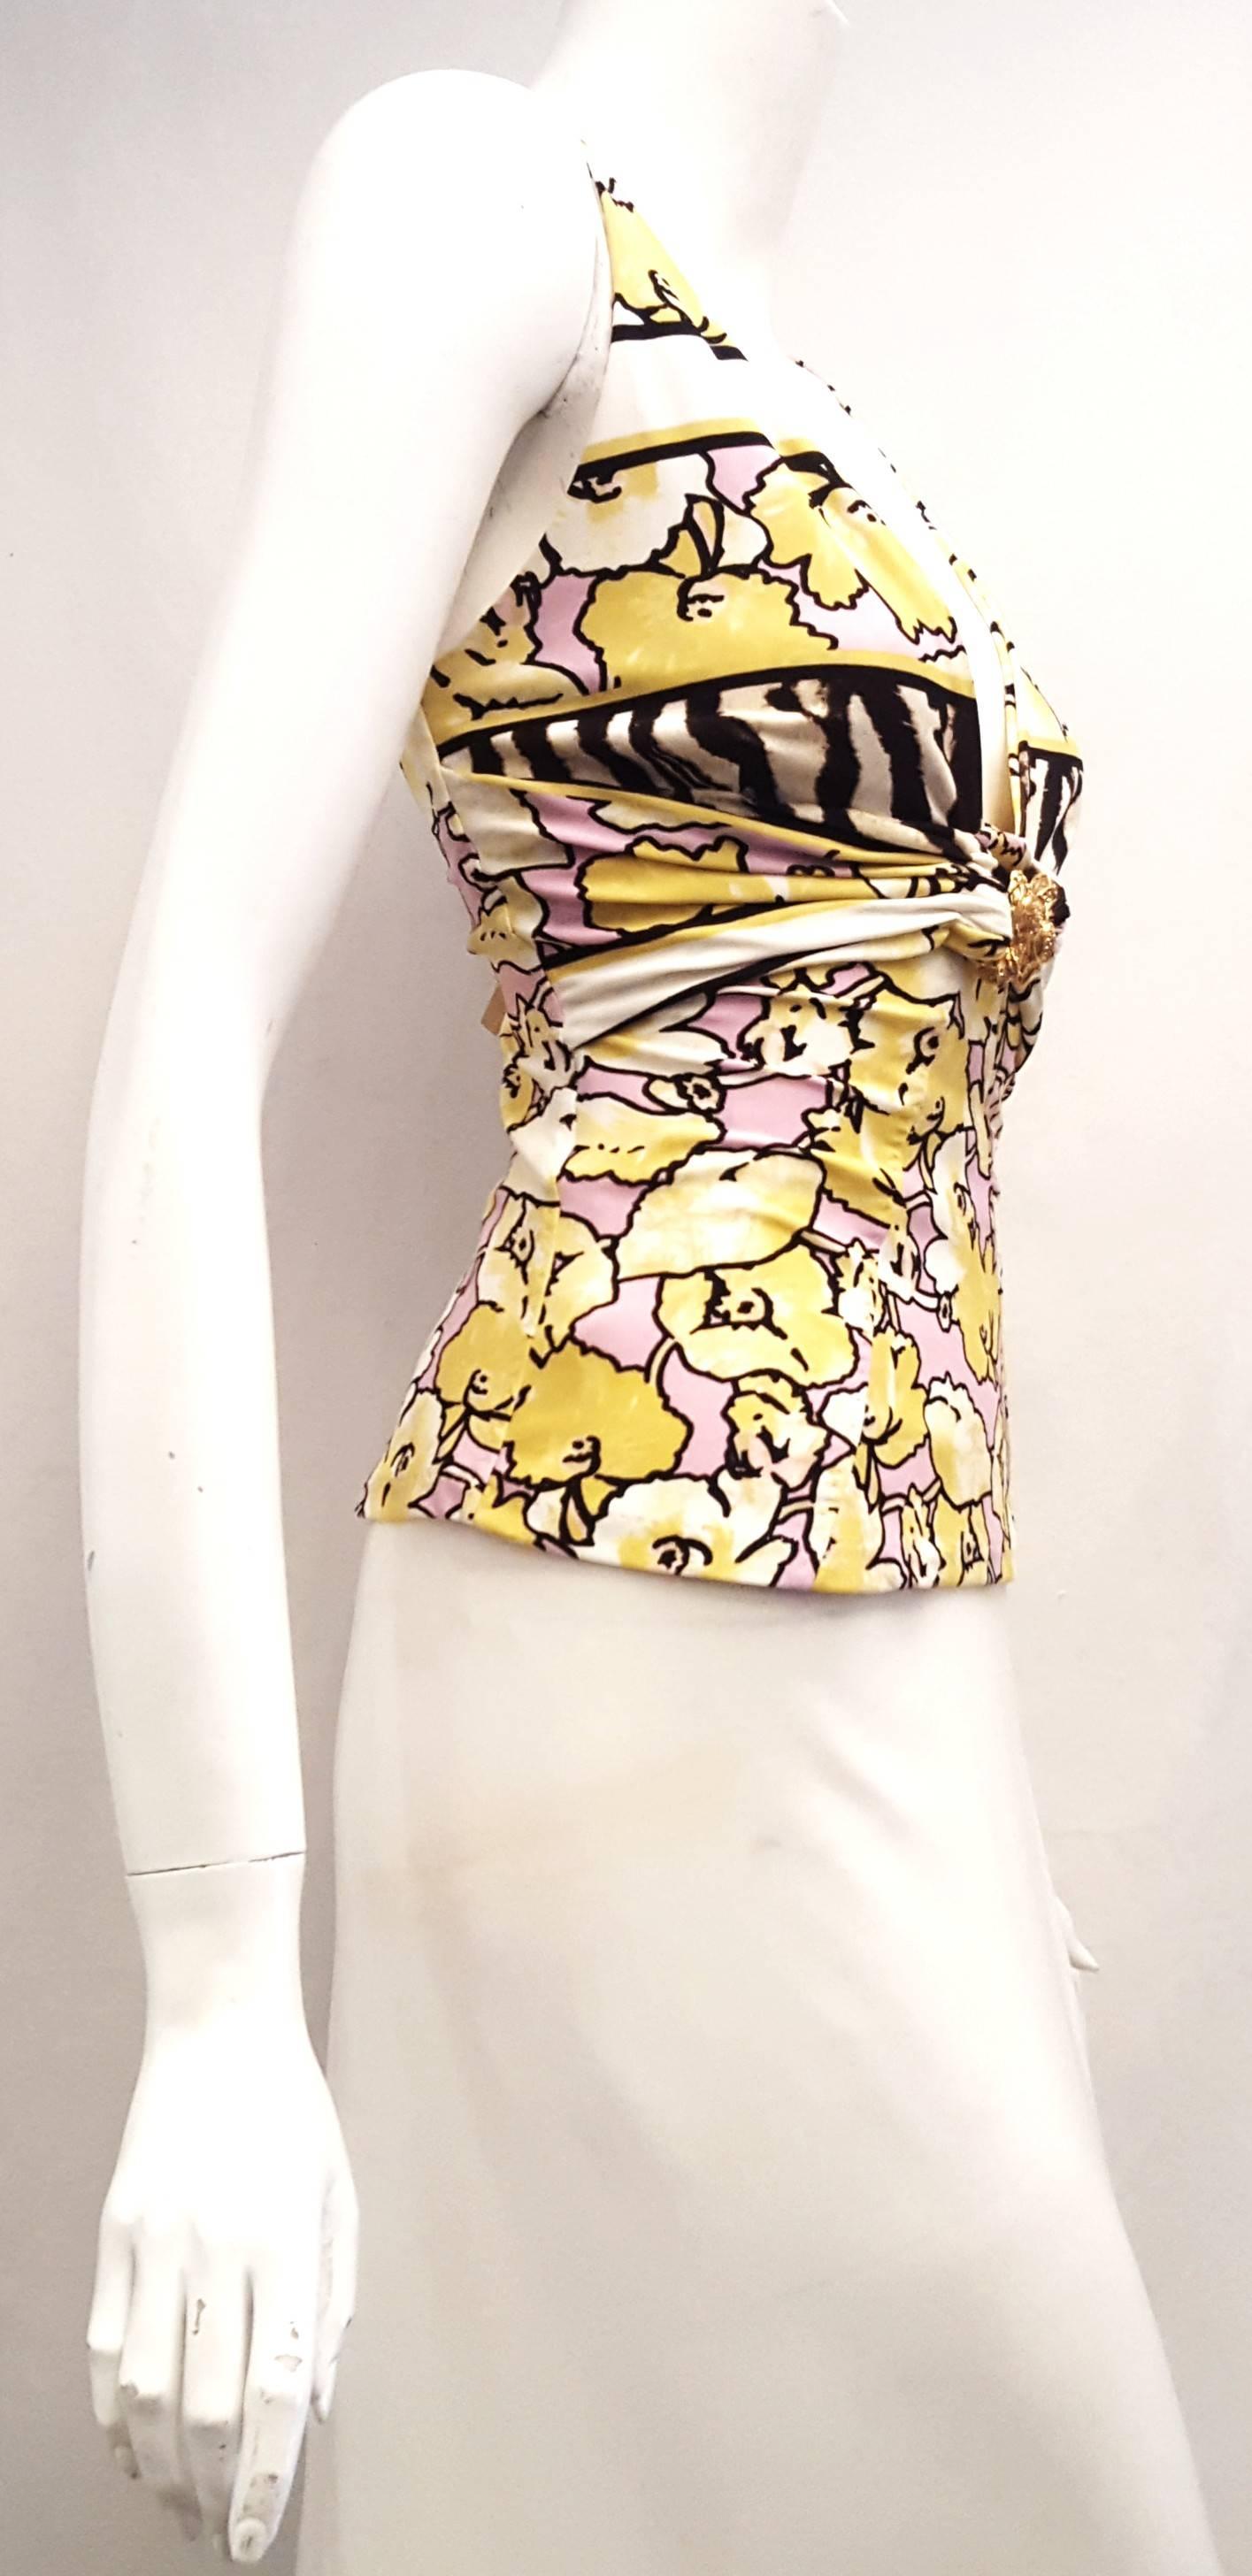 Roberto Cavalli Yellow, Pink Floral Sleeveless Top In Excellent Condition For Sale In Palm Beach, FL